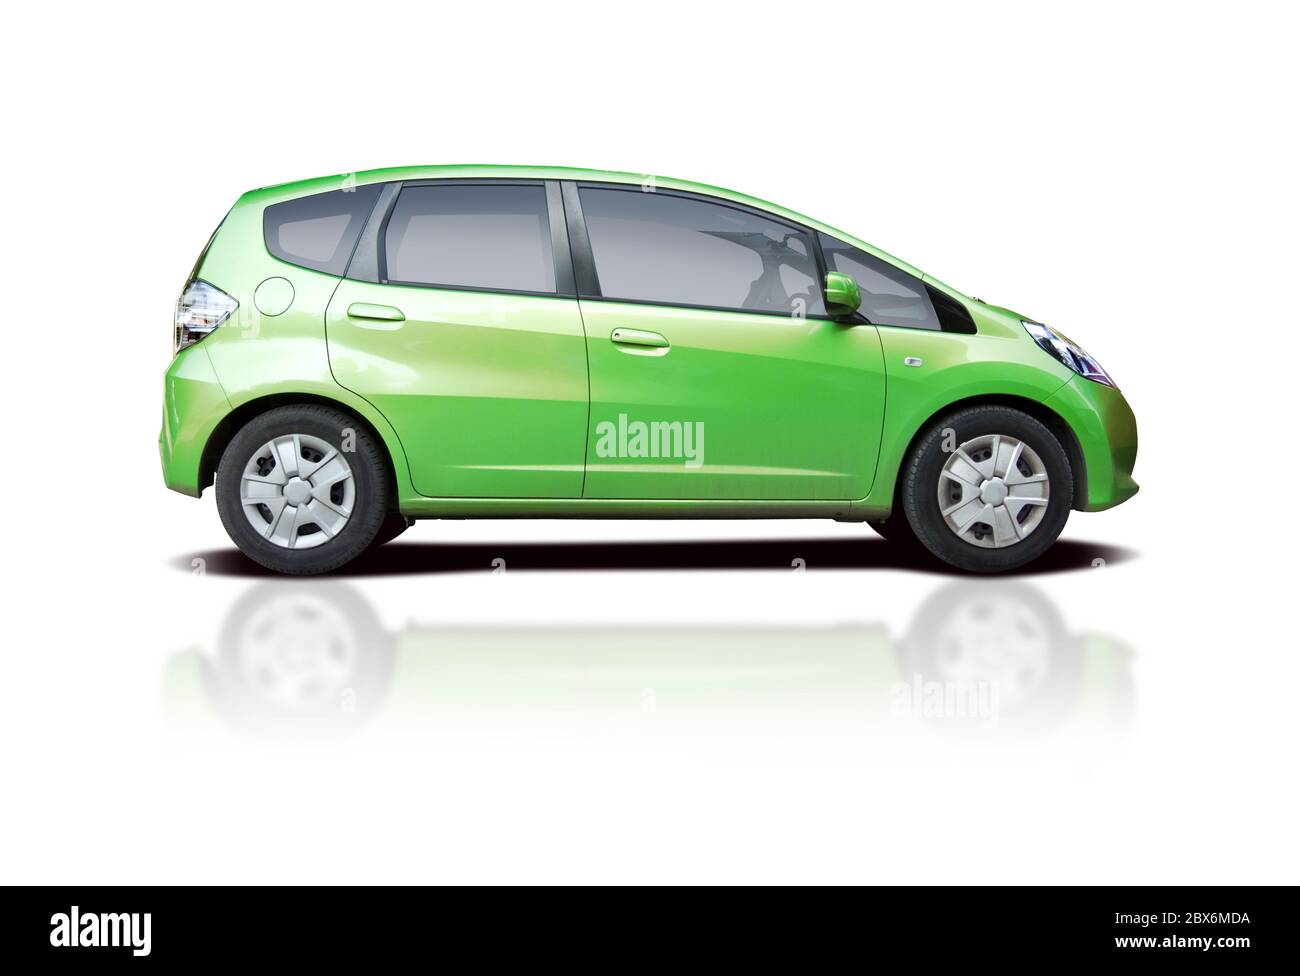 Green MPV car side view isolated on white Stock Photo